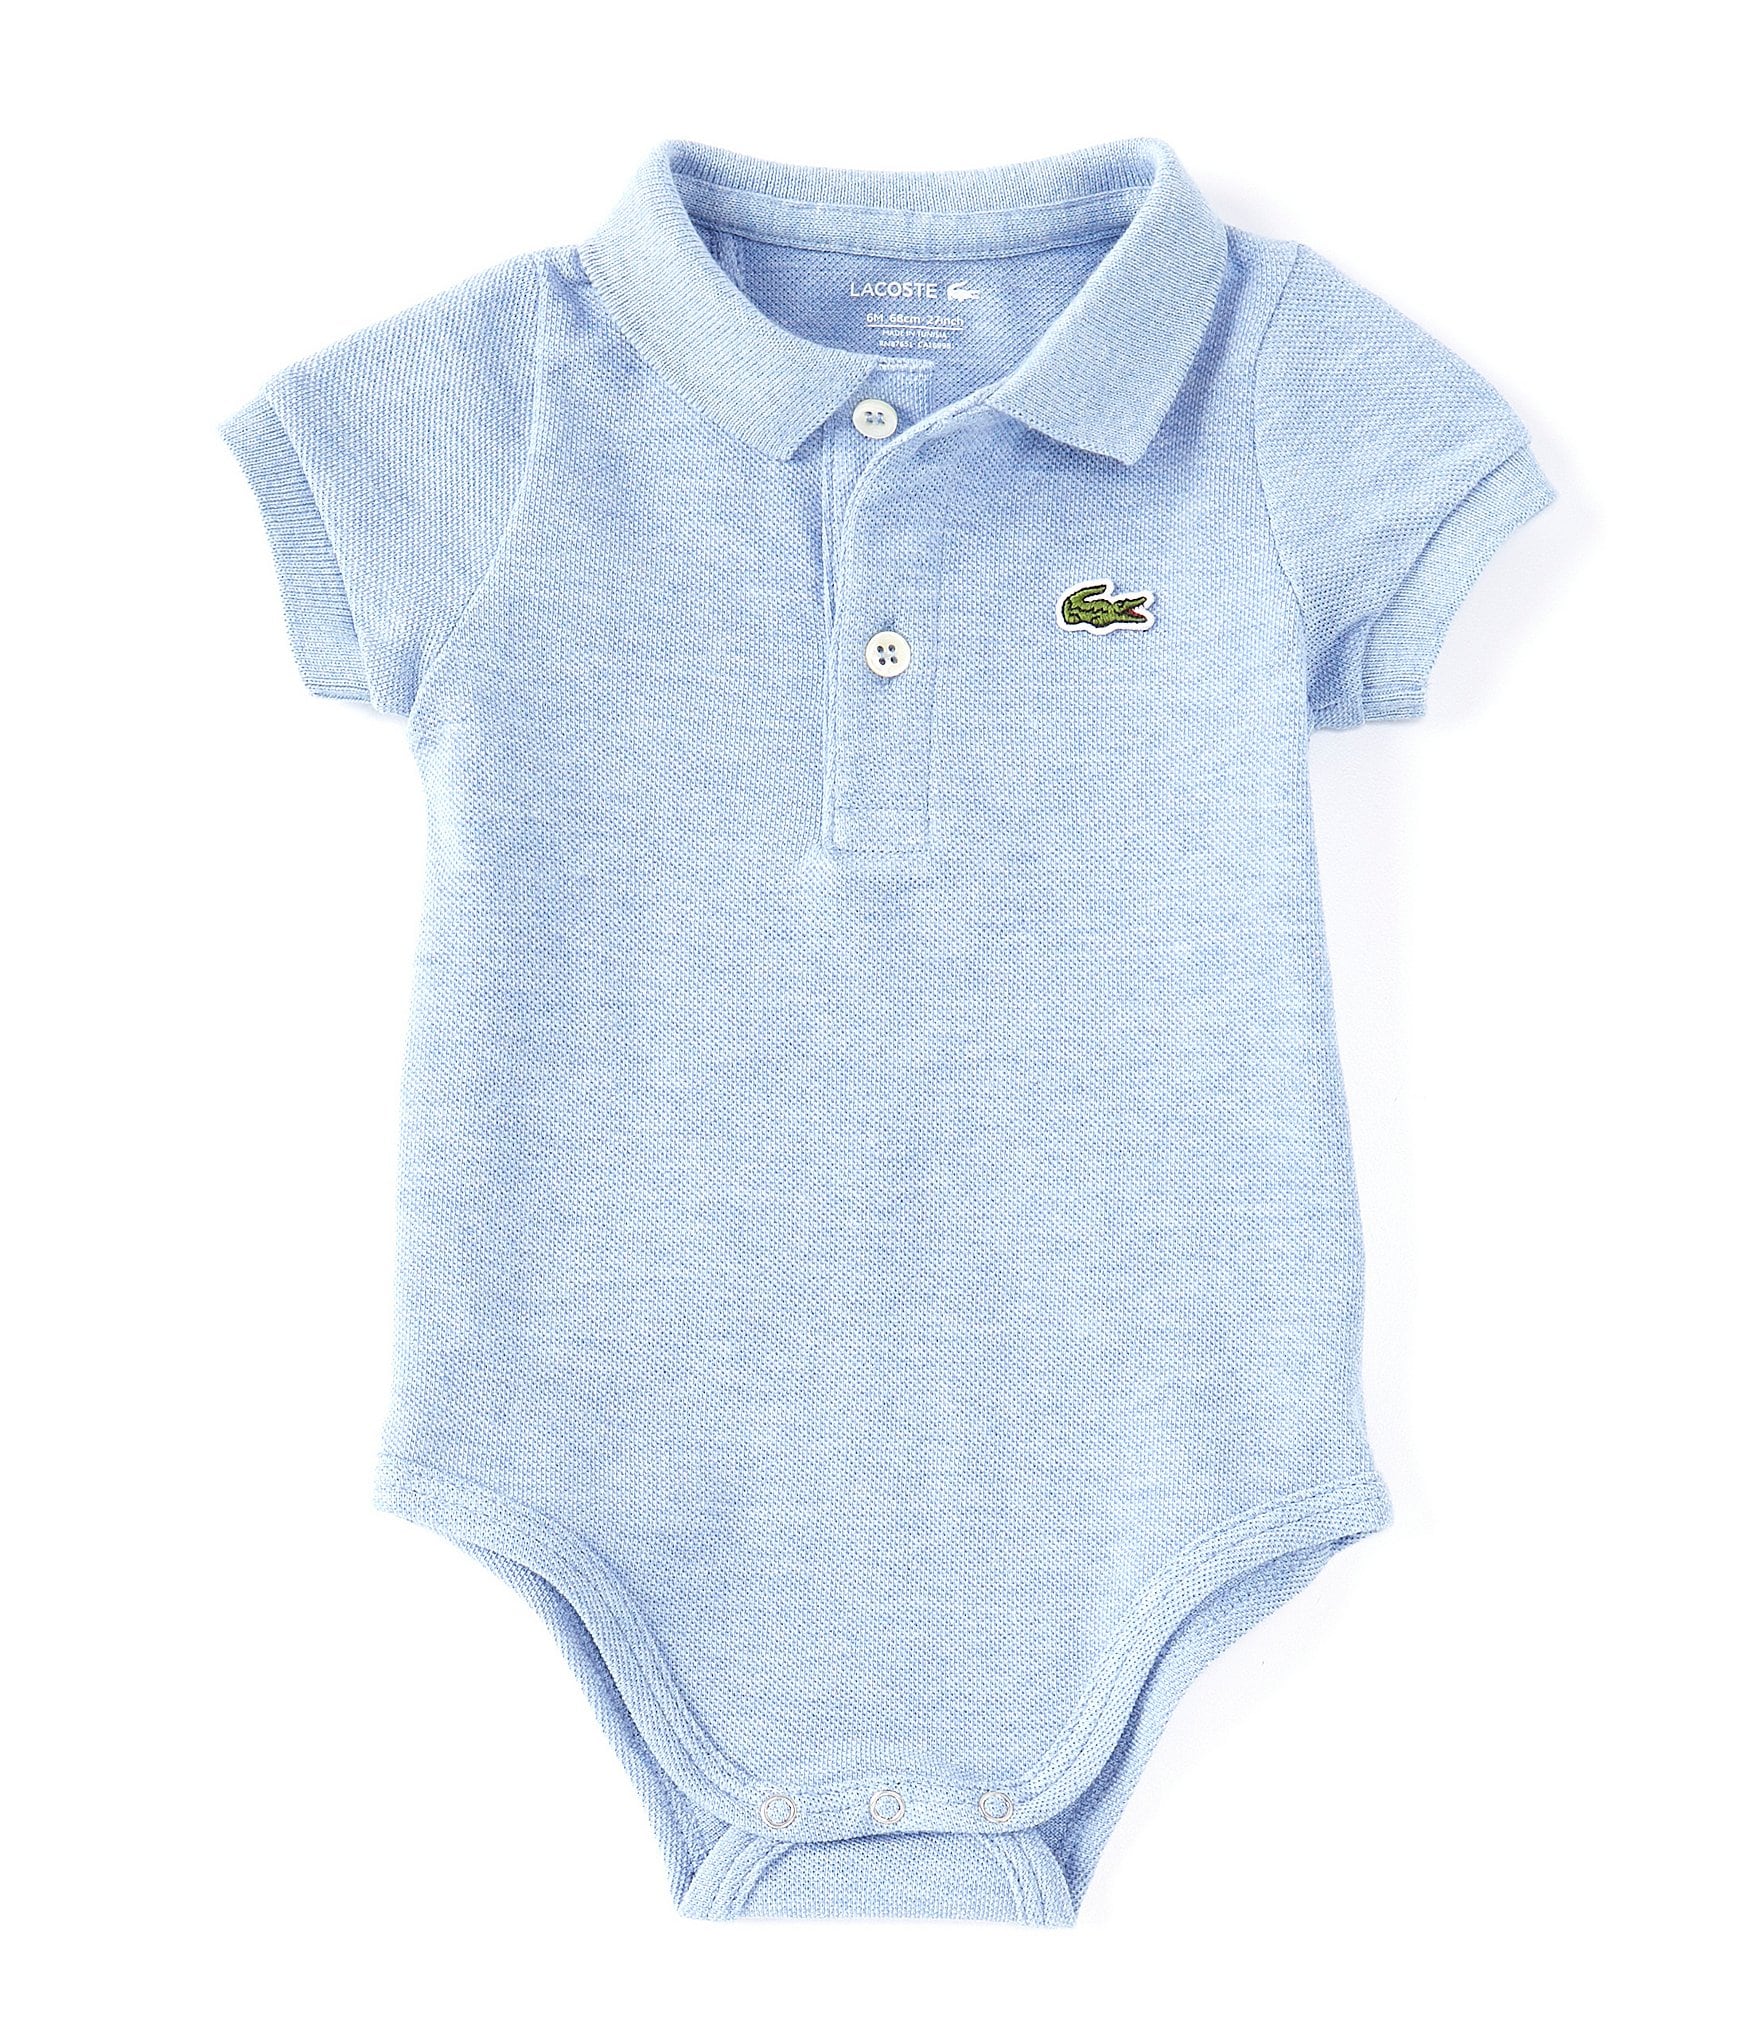 Lacoste Kids' & Clothing & Accessories | Dillard's